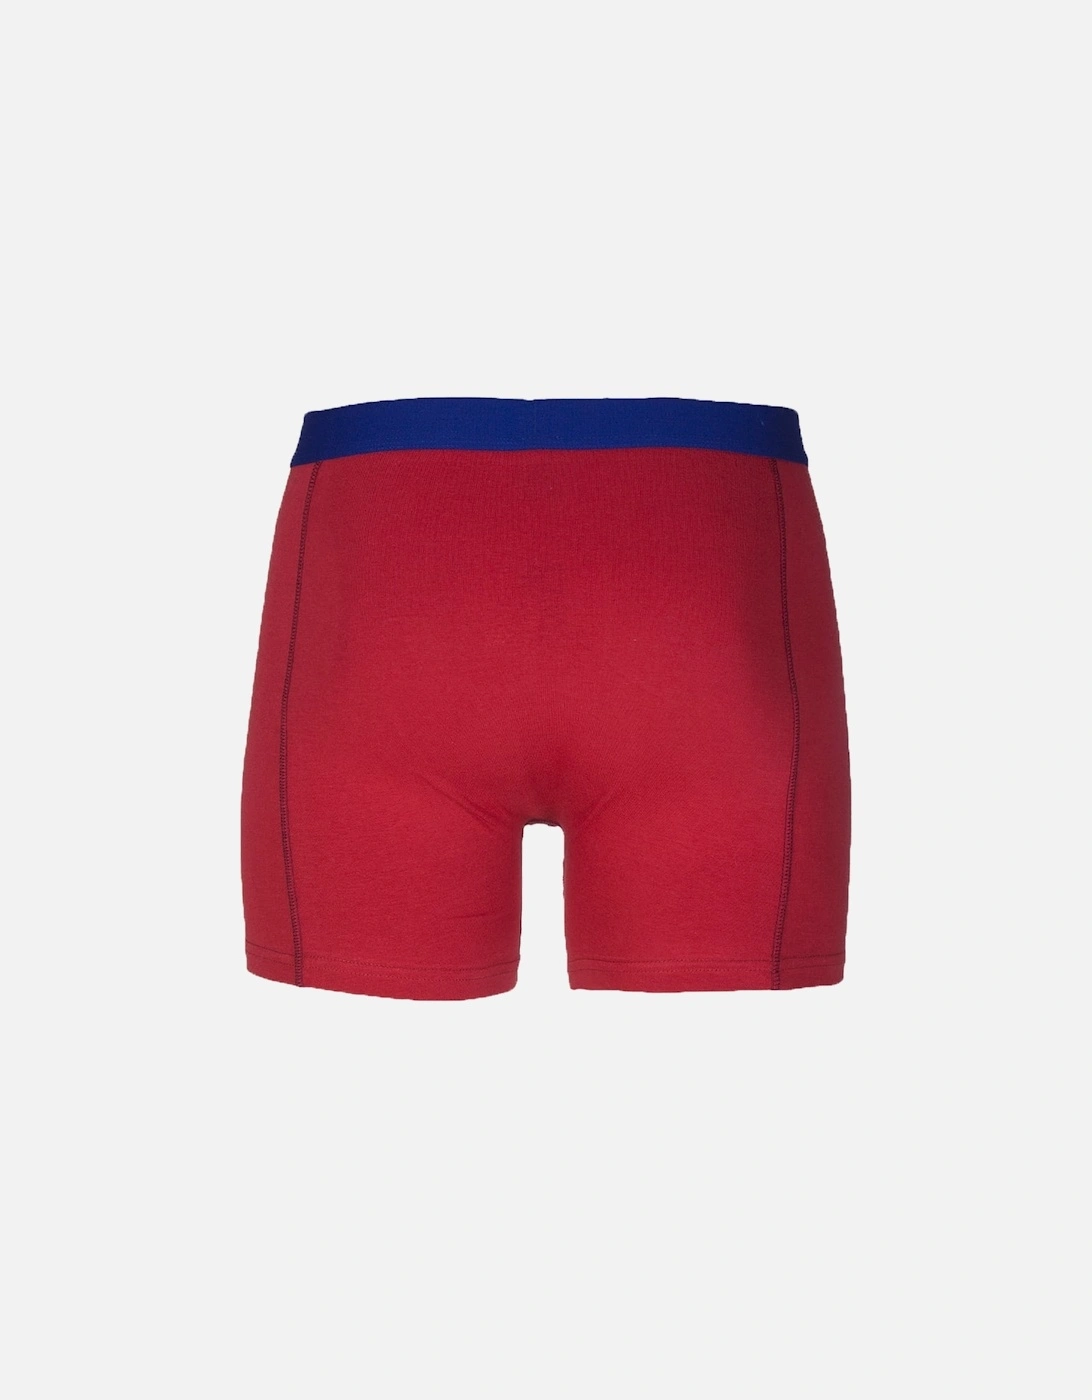 Camille Men's Boxer Shorts in Red Comfortable Breathable Cotton Underwear